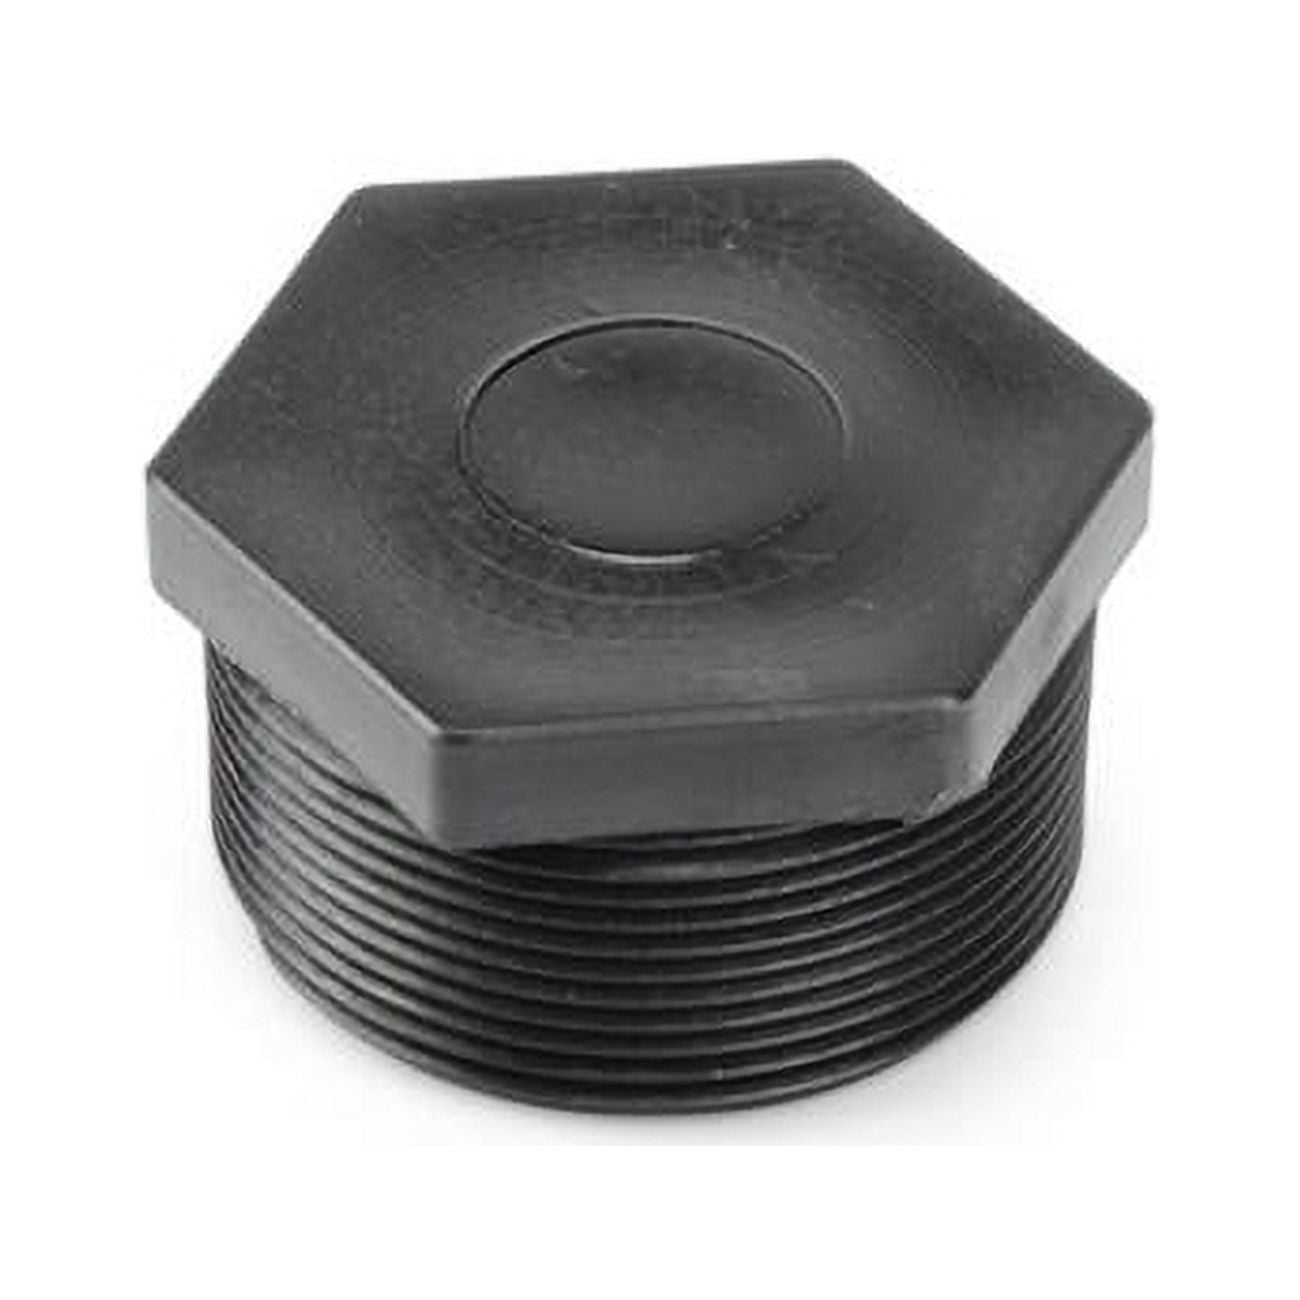 Picture of Aquascape 29394 2 in. Fitting Hex Head Threaded Plug - MPT2